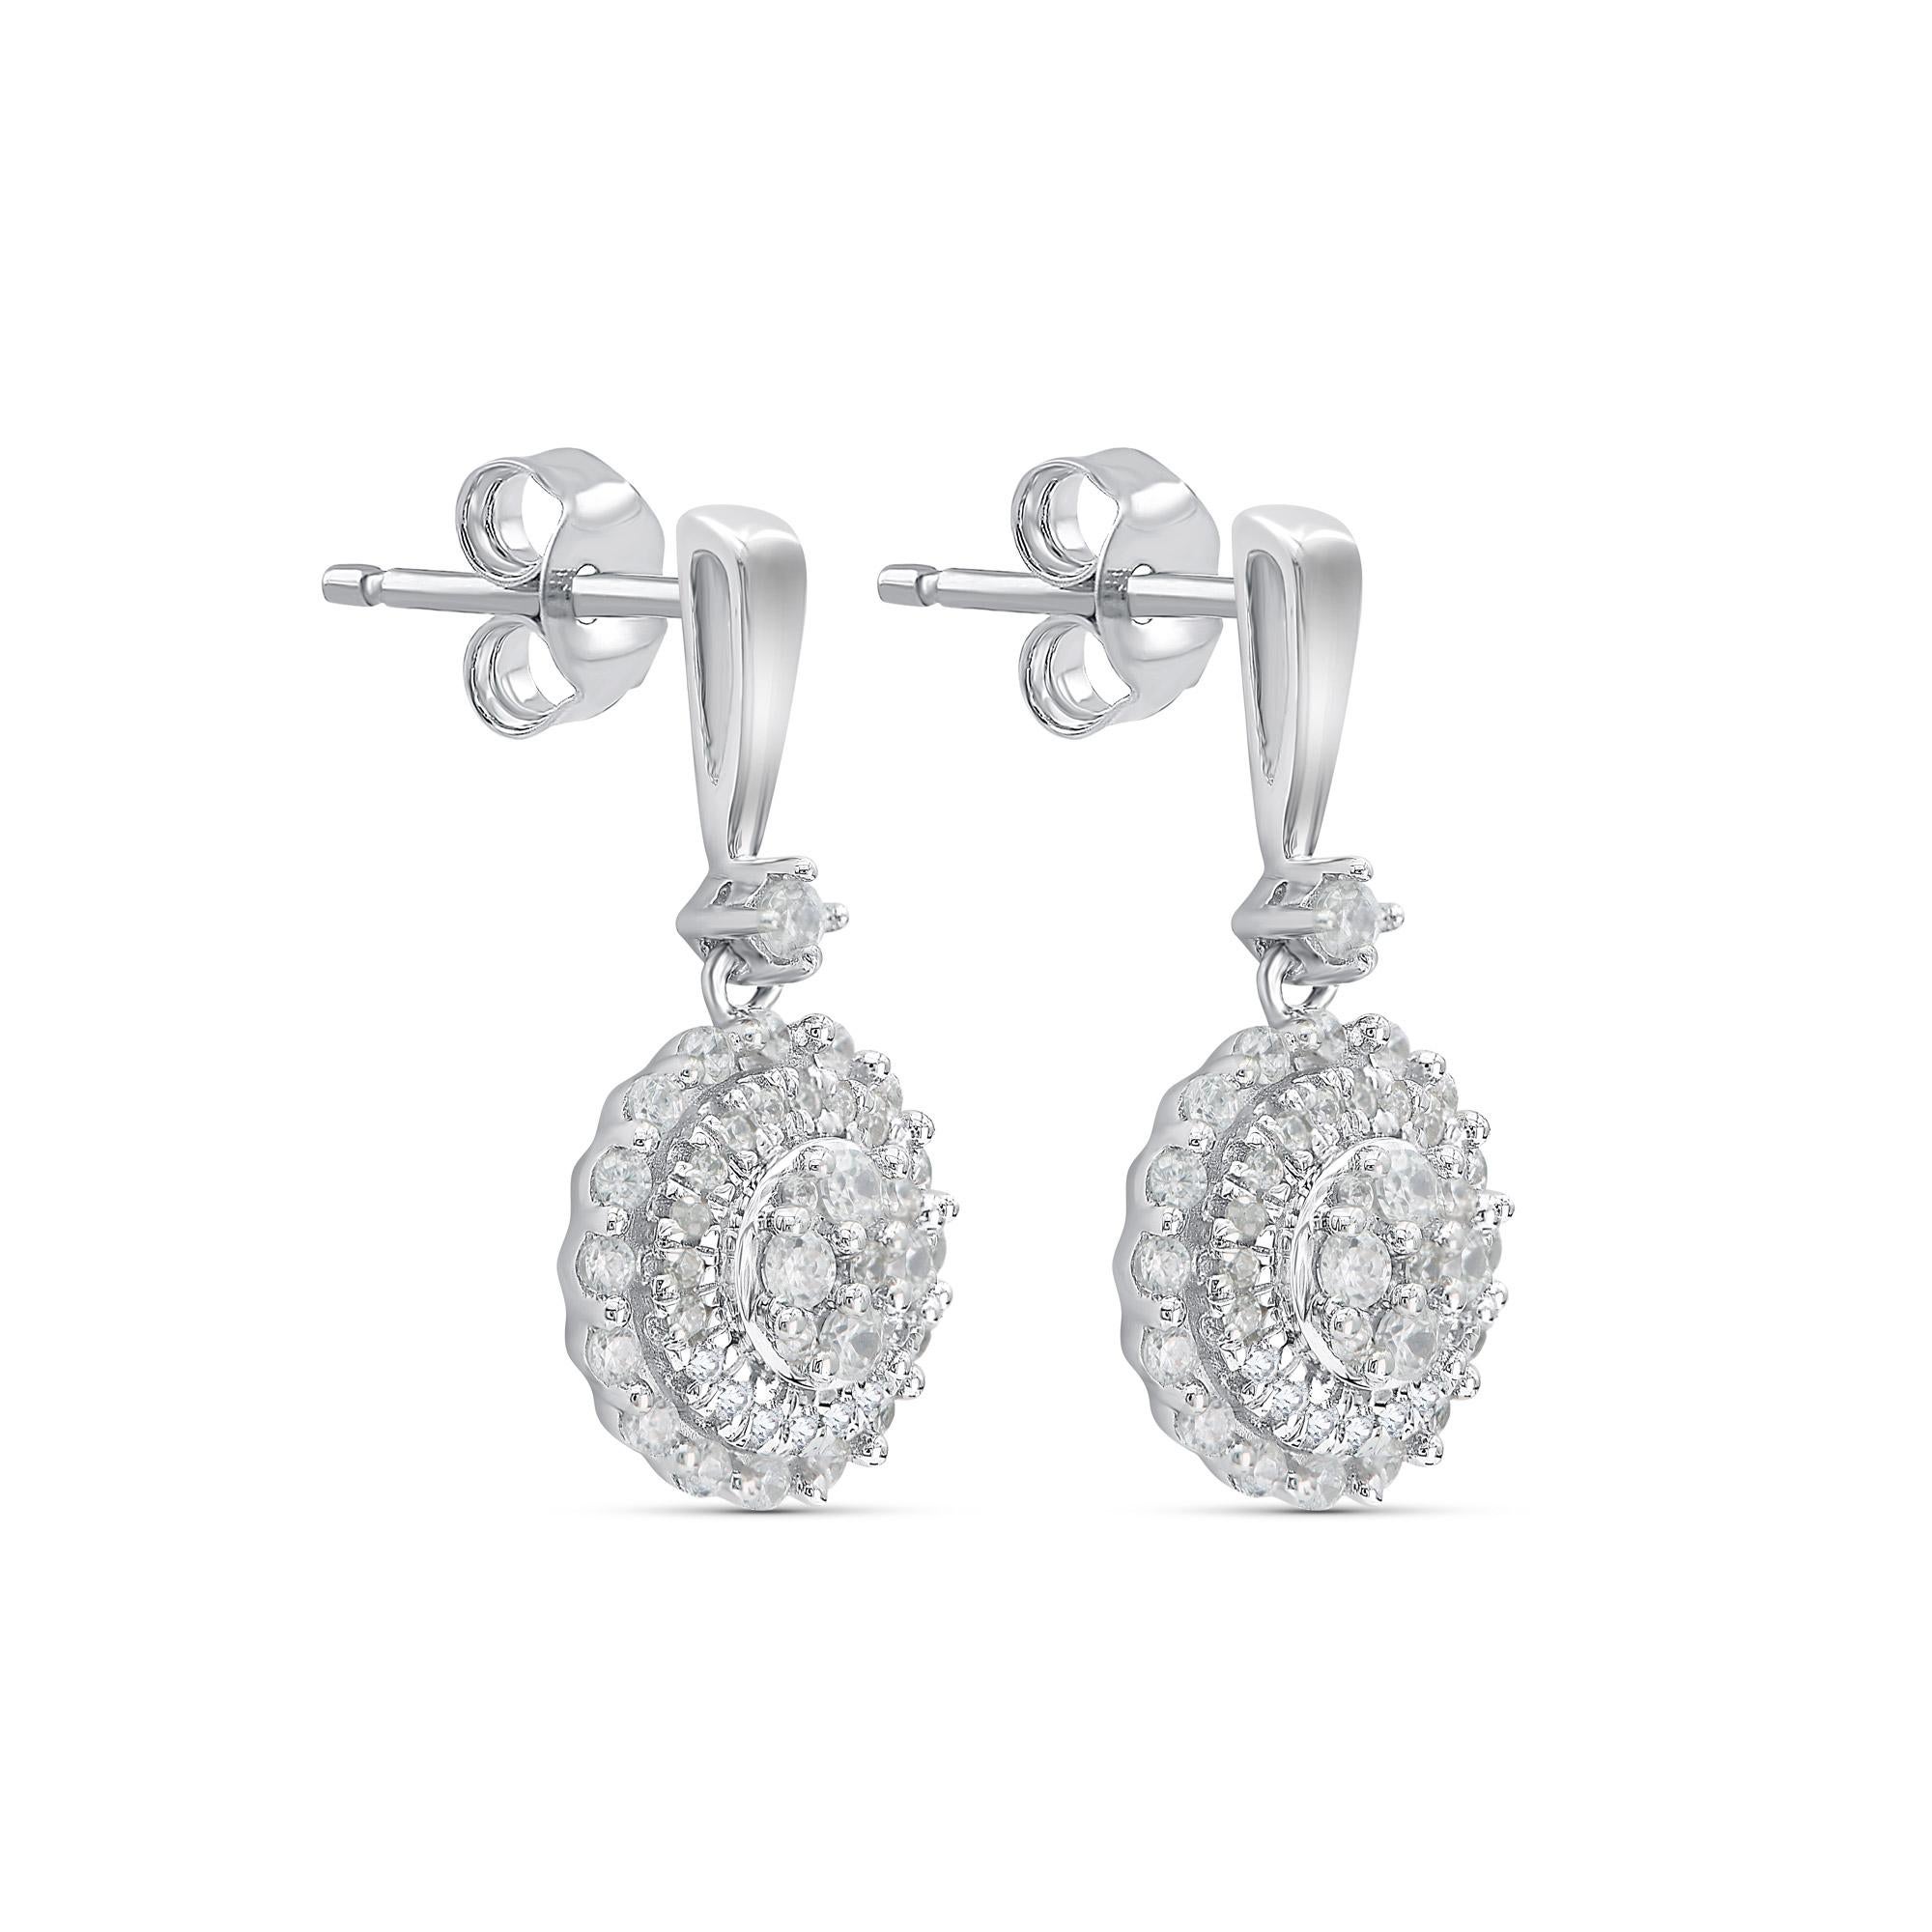 The perfect complement to her classic style, this diamond circle earrings shines with your happily ever after. These earrings feature dazzling with 92 single cut and brilliant cut round diamond set in prong setting. Total diamond weight is 0.50